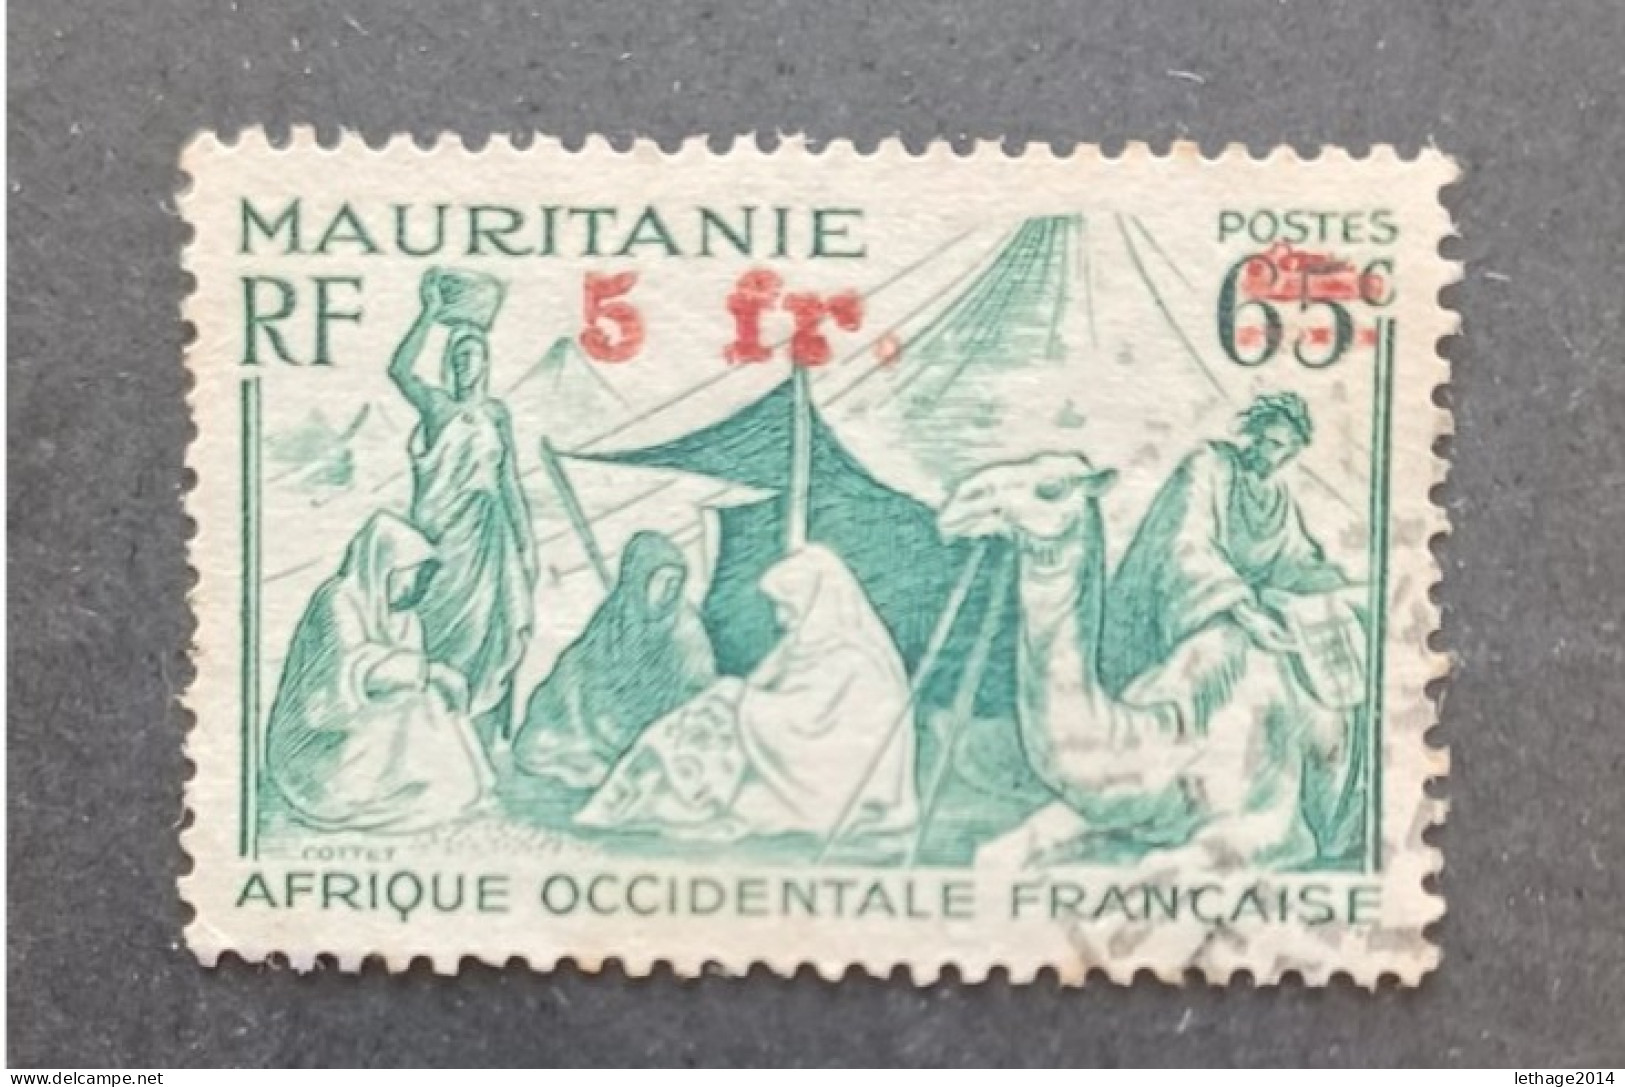 COLONIE FRANCE MAURITANIE 1944 NOMADES CAT YVERT N 135 VARIETY OVERPRINT TRIPLE STRETCH TO THE RIGHT - Gebraucht